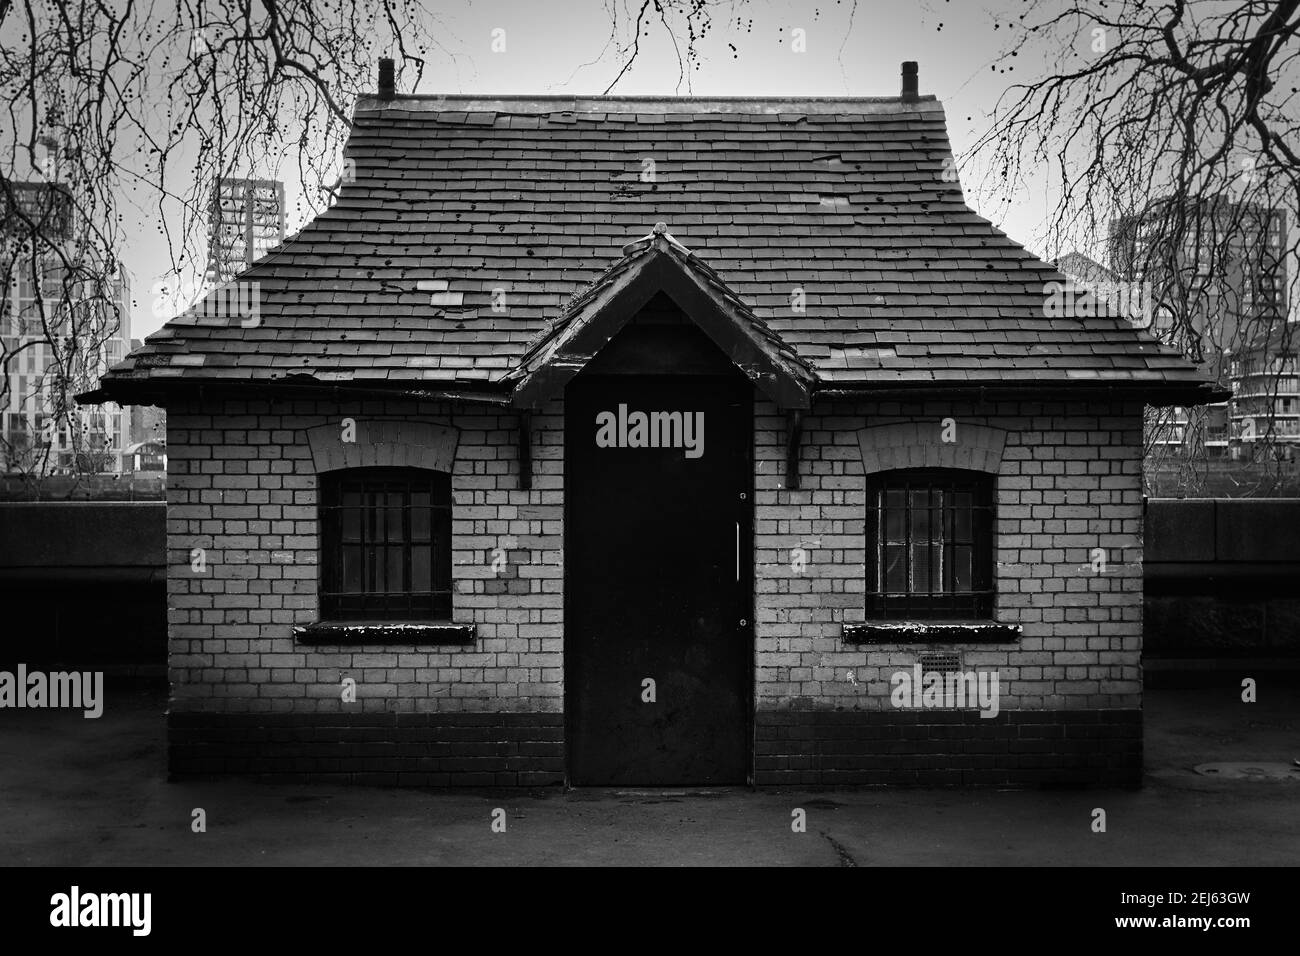 Black and white monochrome image of a small 1 story brick building with one black door, two windows and slate roof. Stock Photo